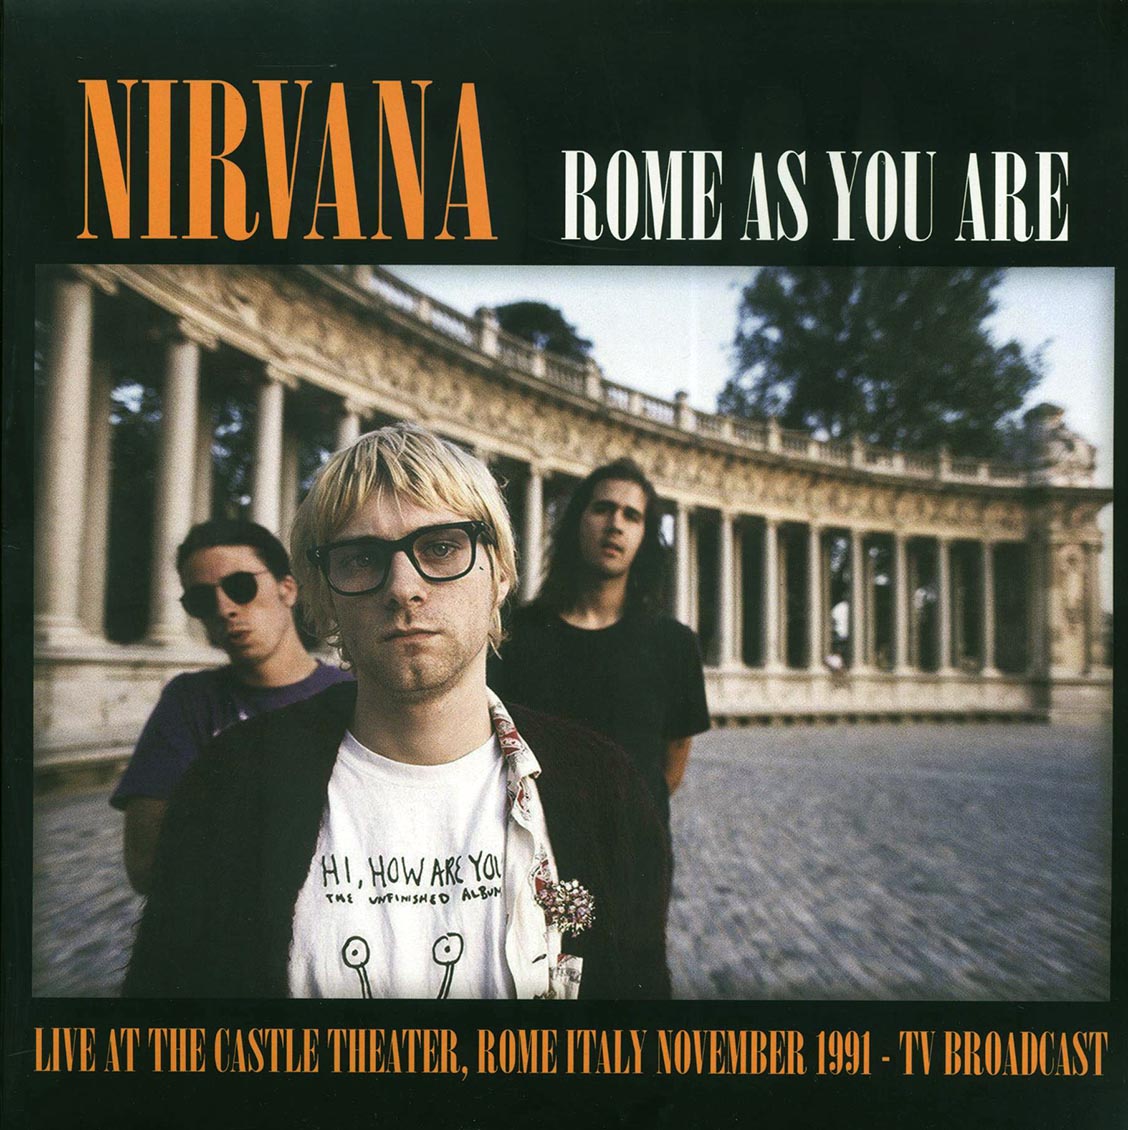 Nirvana - Rome As You Are: Live At The Castle Theatre, Rome, Italy, November 1991 TV Broadcast (ltd. 500 copies made) (pink vinyl) - Vinyl LP